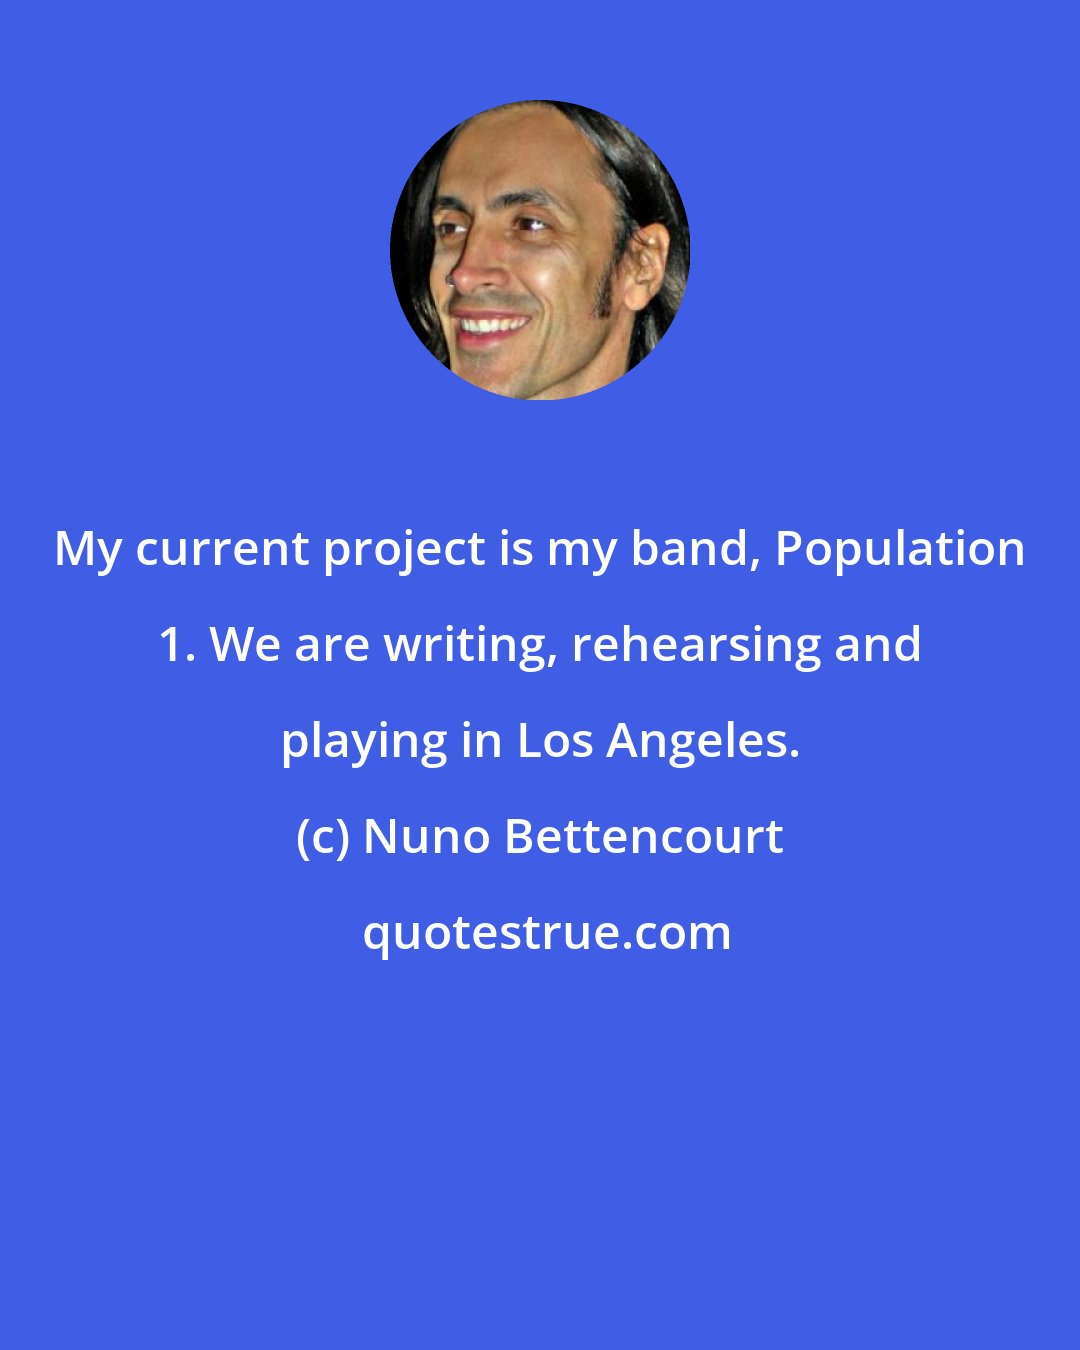 Nuno Bettencourt: My current project is my band, Population 1. We are writing, rehearsing and playing in Los Angeles.